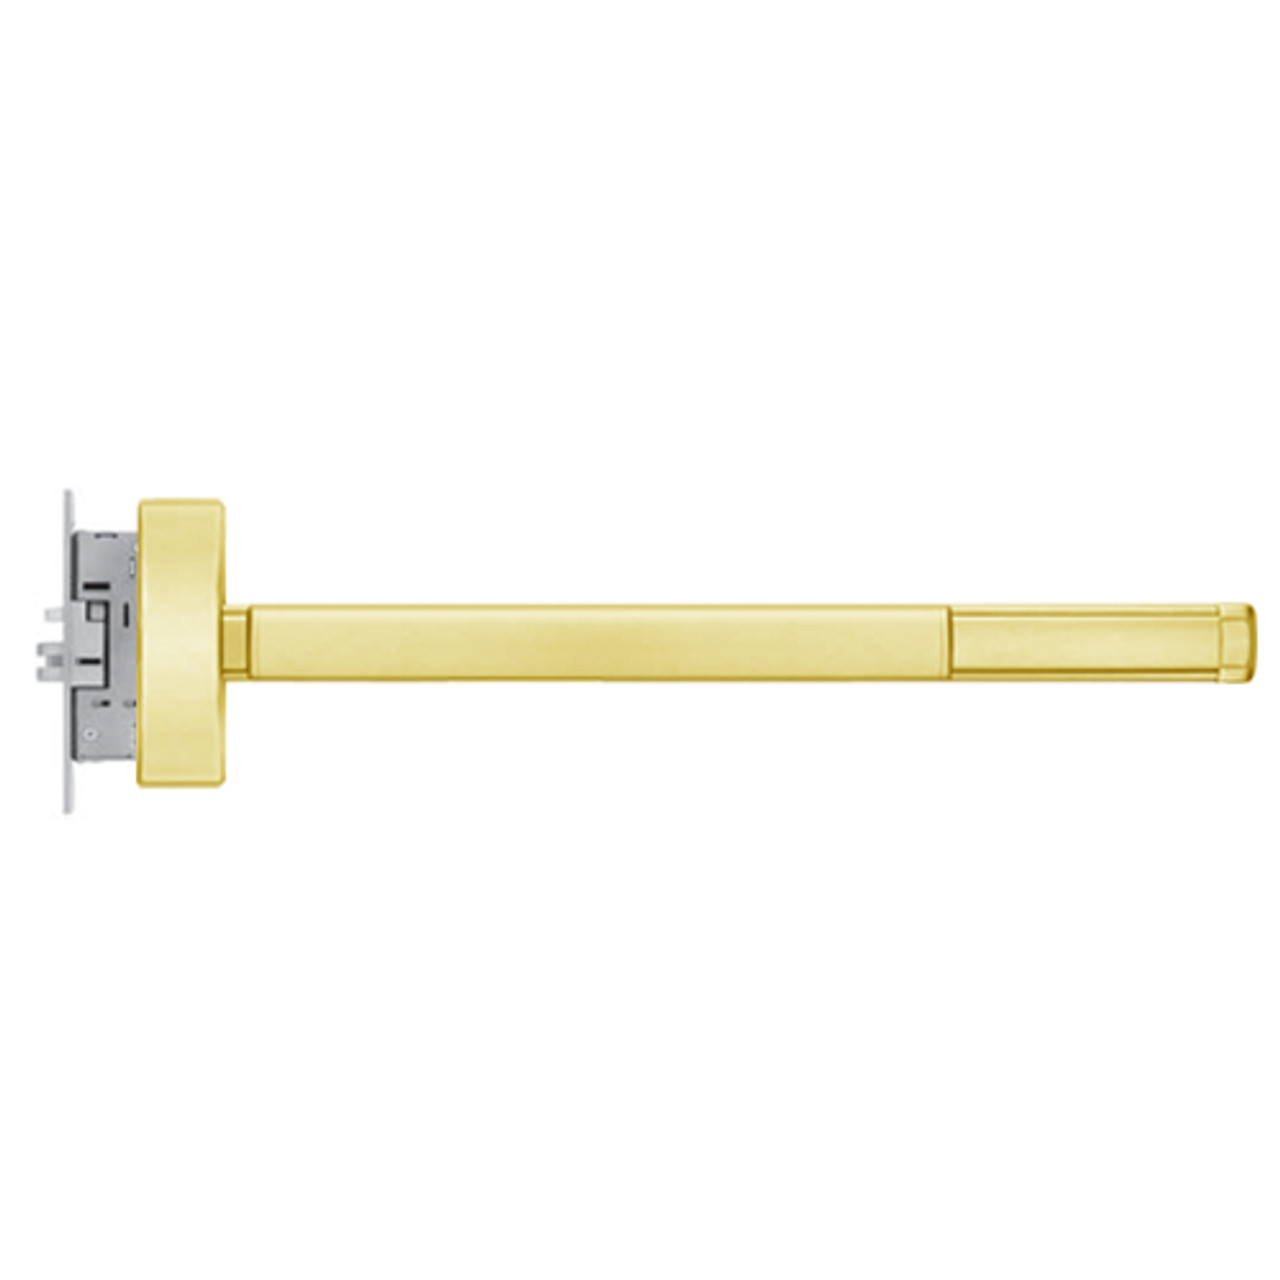 2308-RHR-605-48 PHI 2300 Series Non Fire Rated Apex Mortise Exit Device Prepped for Key Controls Lever/Knob in Bright Brass Finish